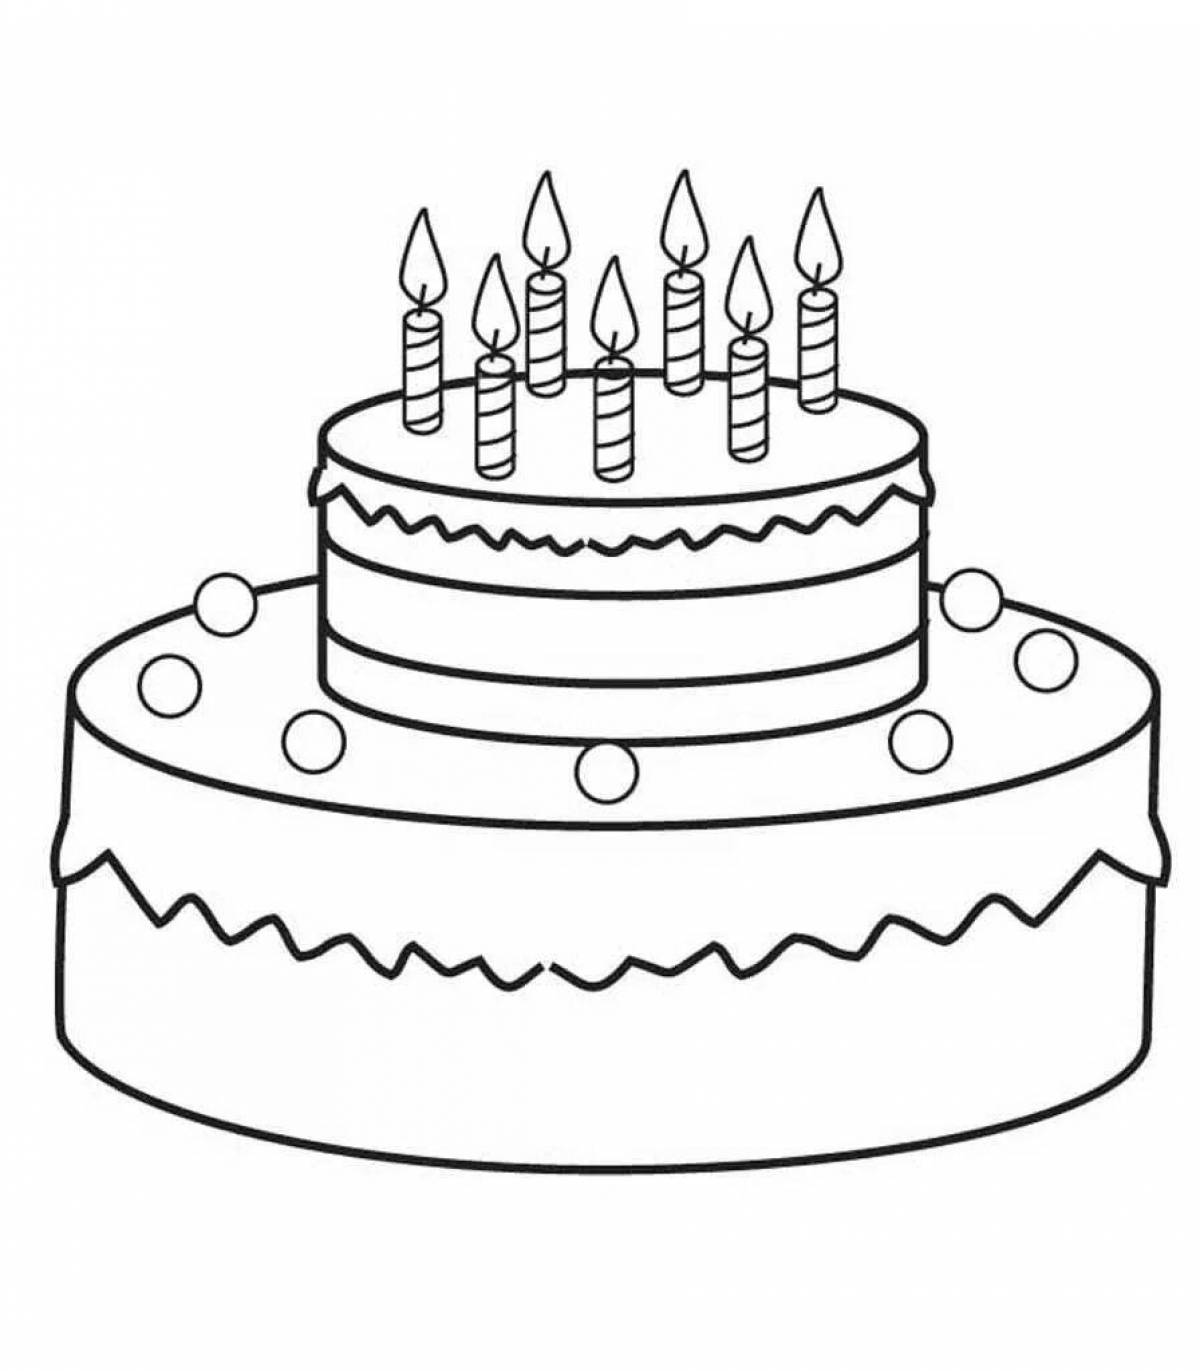 Adorable cake coloring page for kids